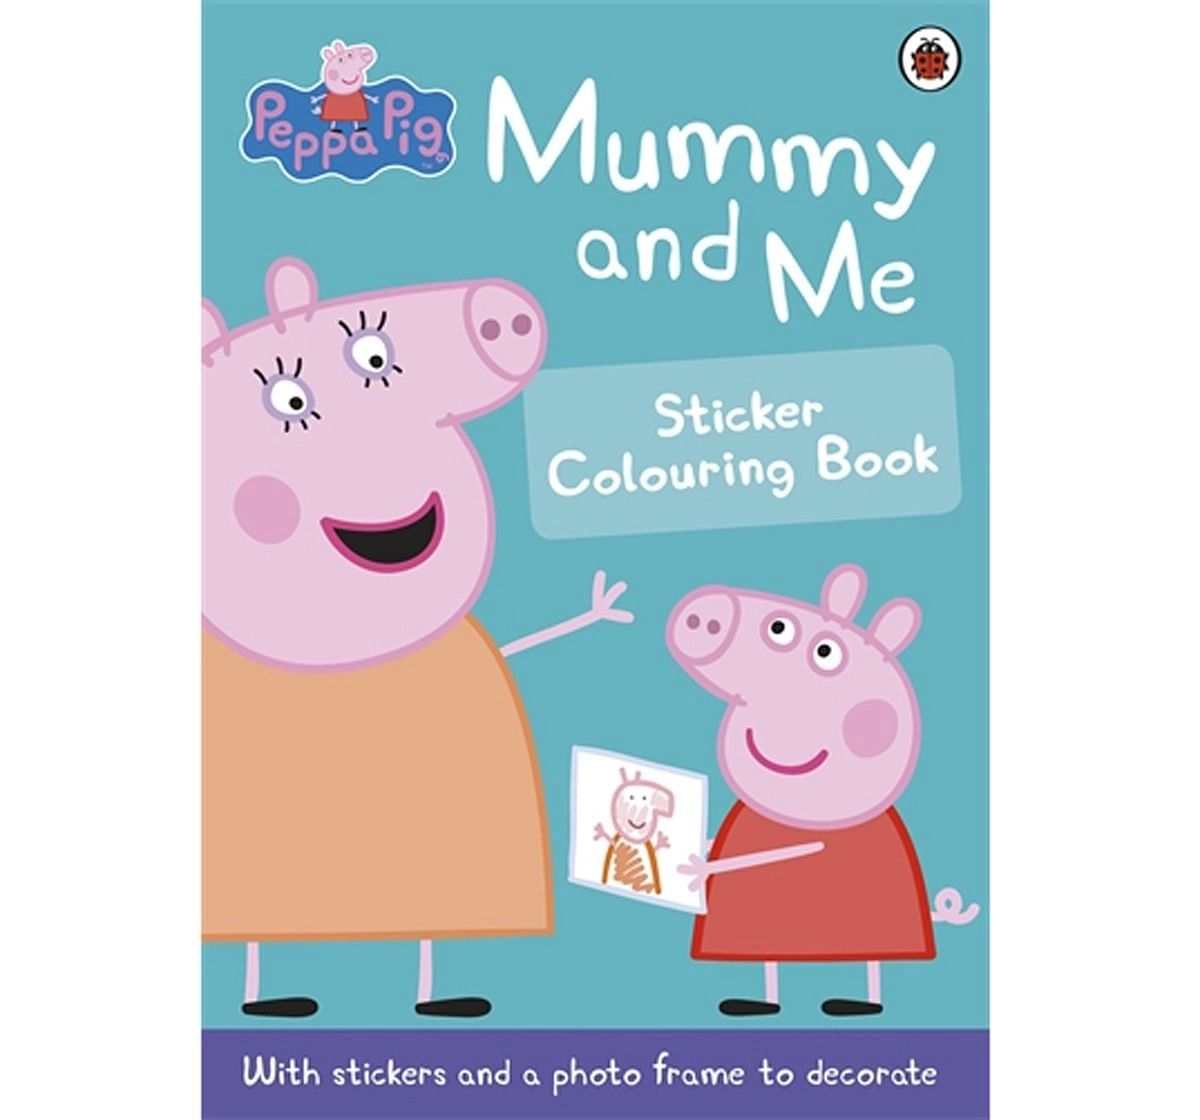 Peppa Pig Mummy and Me Sticker Colouring book Soft Cover Multicolour 3Y+